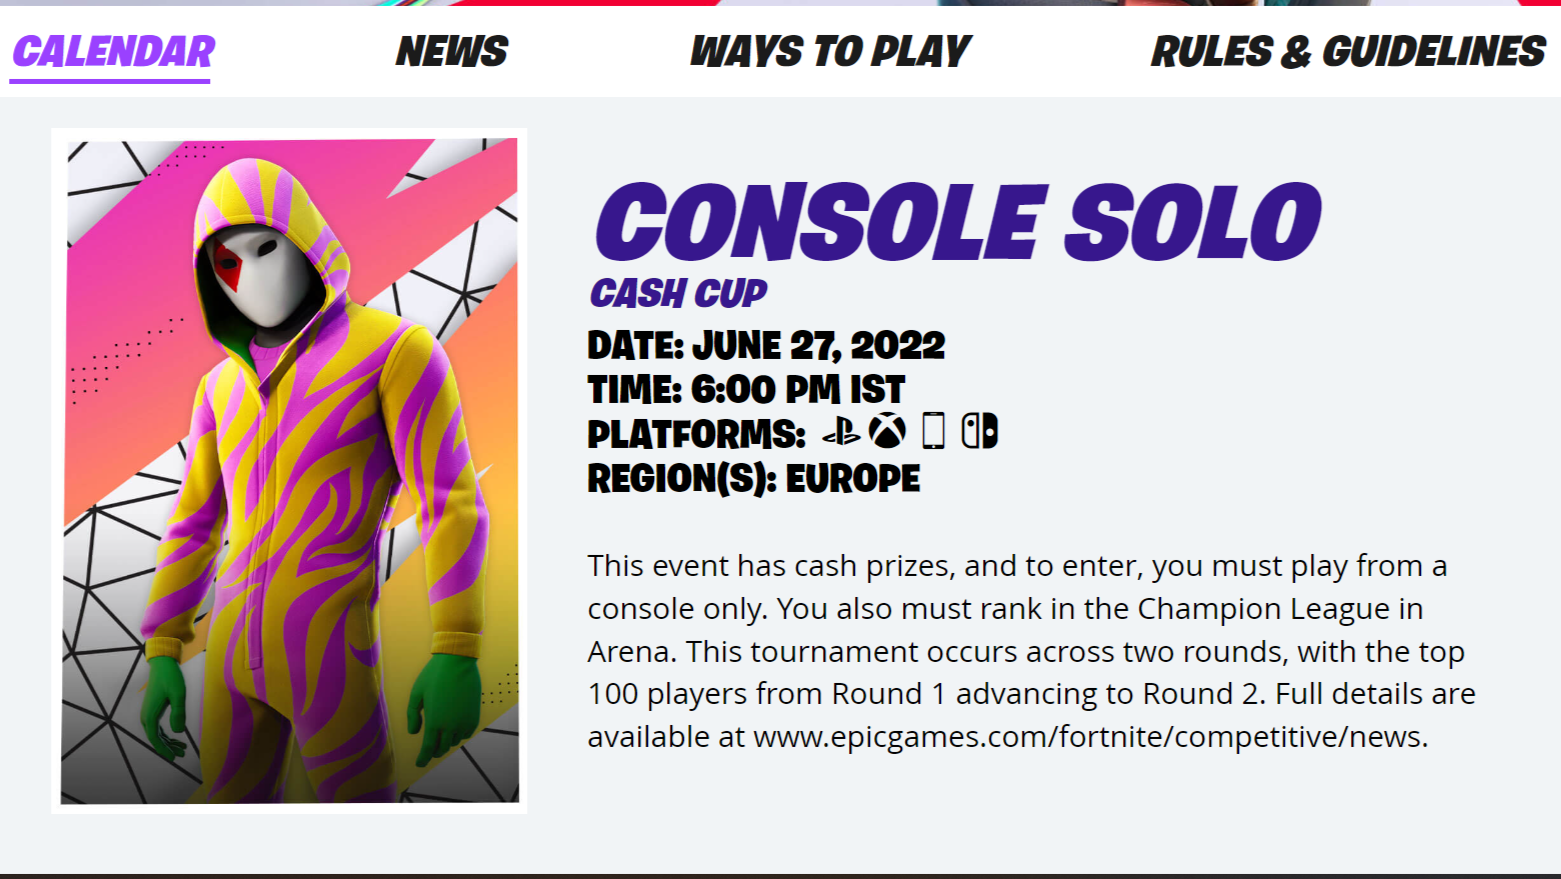 Fortnite PlayStation Cup 2022 announced: Start date, prize pool, and more